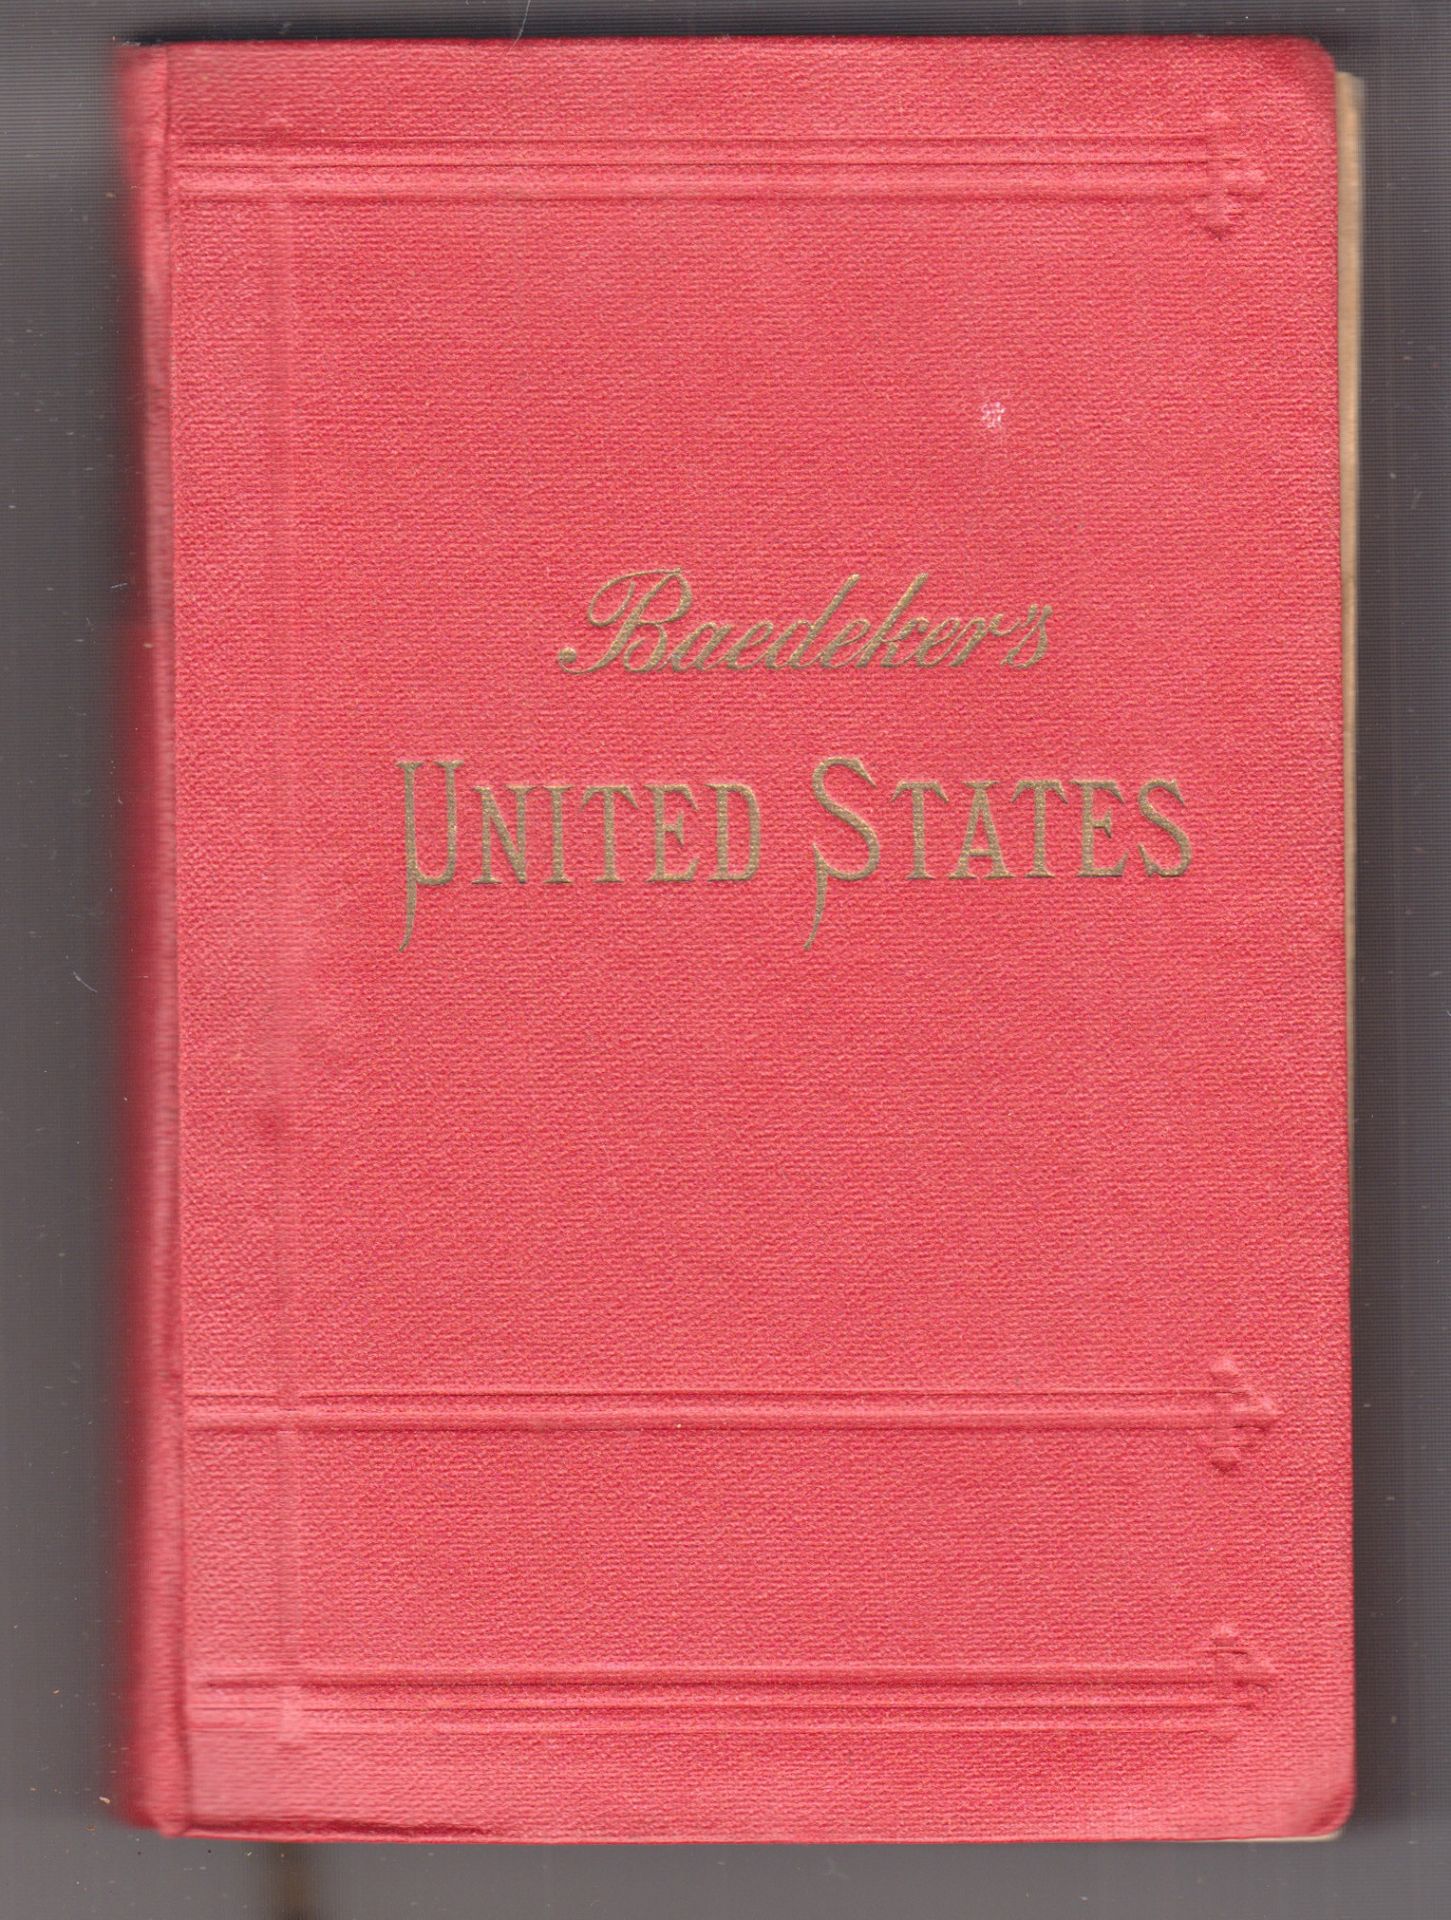 BAEDEKER, Karl (Ed.). The United States with an Excursion to Mexico, Cuba, Porto Rico, and  Alaska.